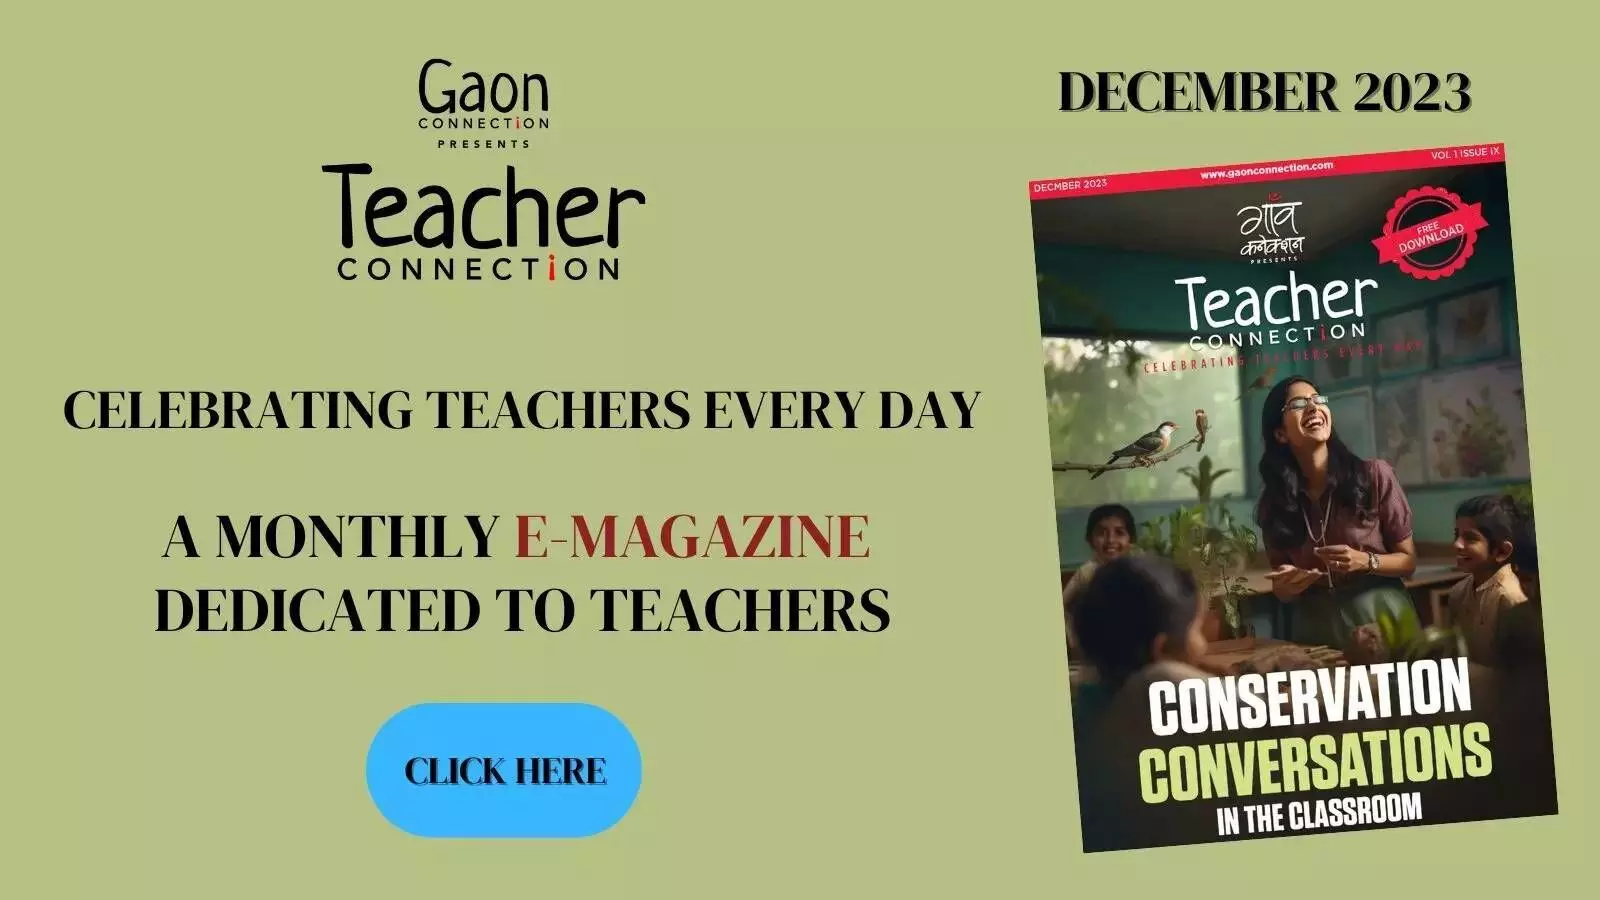 Conservation Conversations in the Classroom — Download and Read the Latest Issue of Teacher Connection Magazine